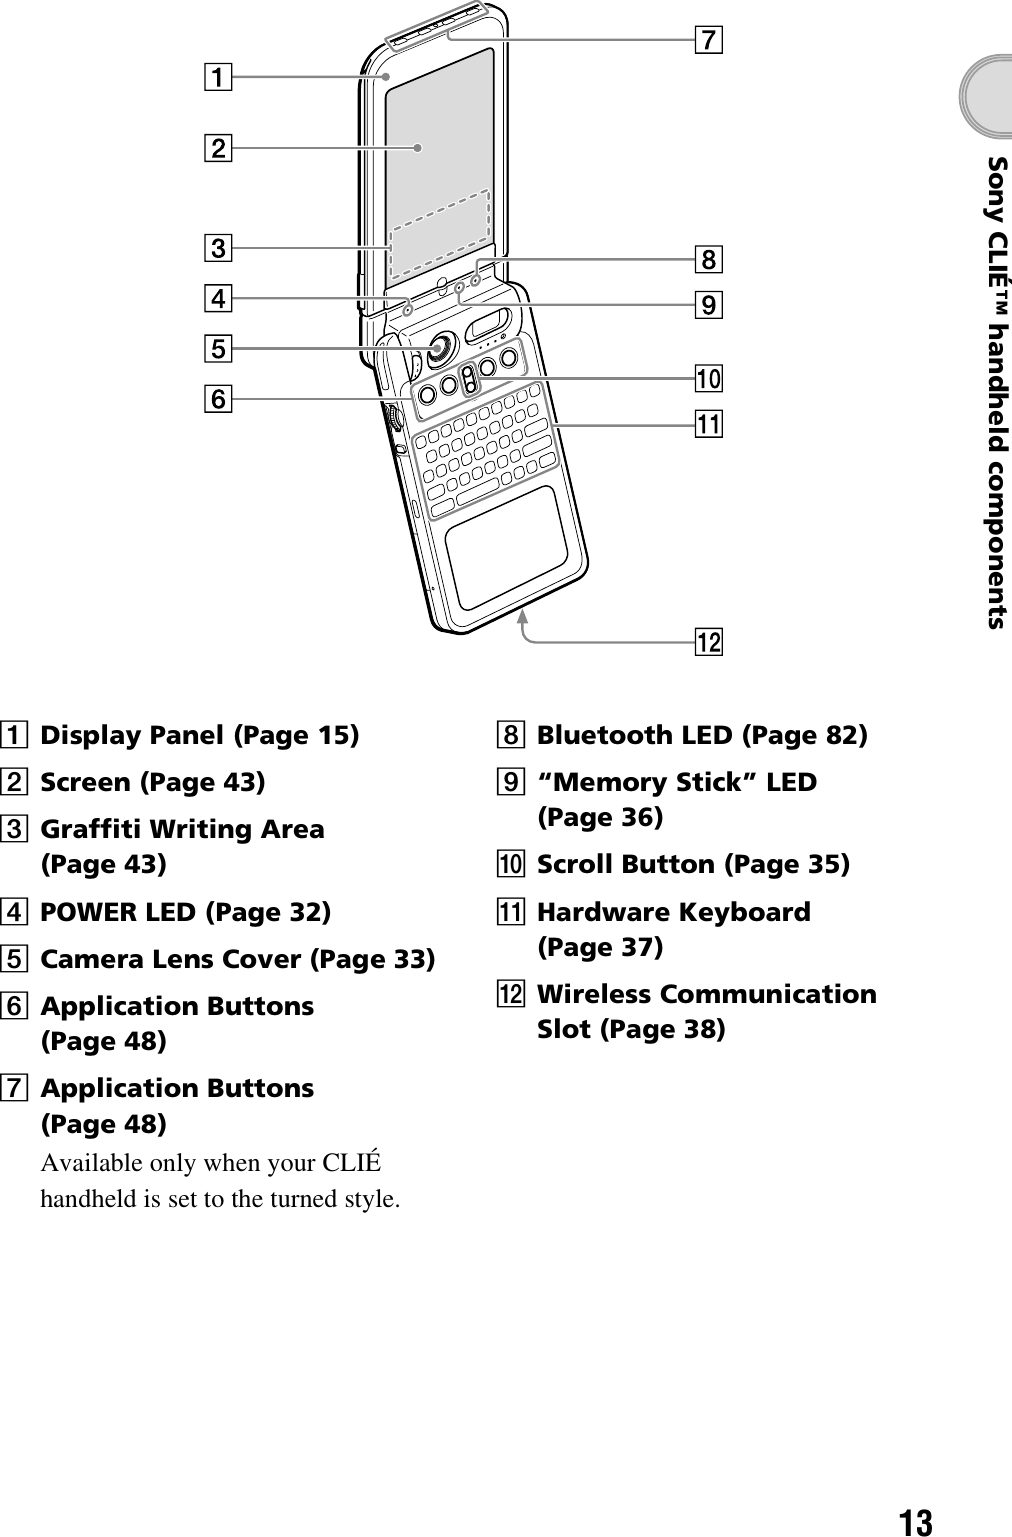 13Sony CLIÉ™ handheld componentsADisplay Panel (Page 15)BScreen (Page 43)CGraffiti Writing Area (Page 43)DPOWER LED (Page 32)ECamera Lens Cover (Page 33)FApplication Buttons (Page 48)GApplication Buttons  (Page 48)Available only when your CLIÉ handheld is set to the turned style.HBluetooth LED (Page 82)I“Memory Stick” LED (Page 36)JScroll Button (Page 35)KHardware Keyboard (Page 37)LWireless Communication Slot (Page 38)